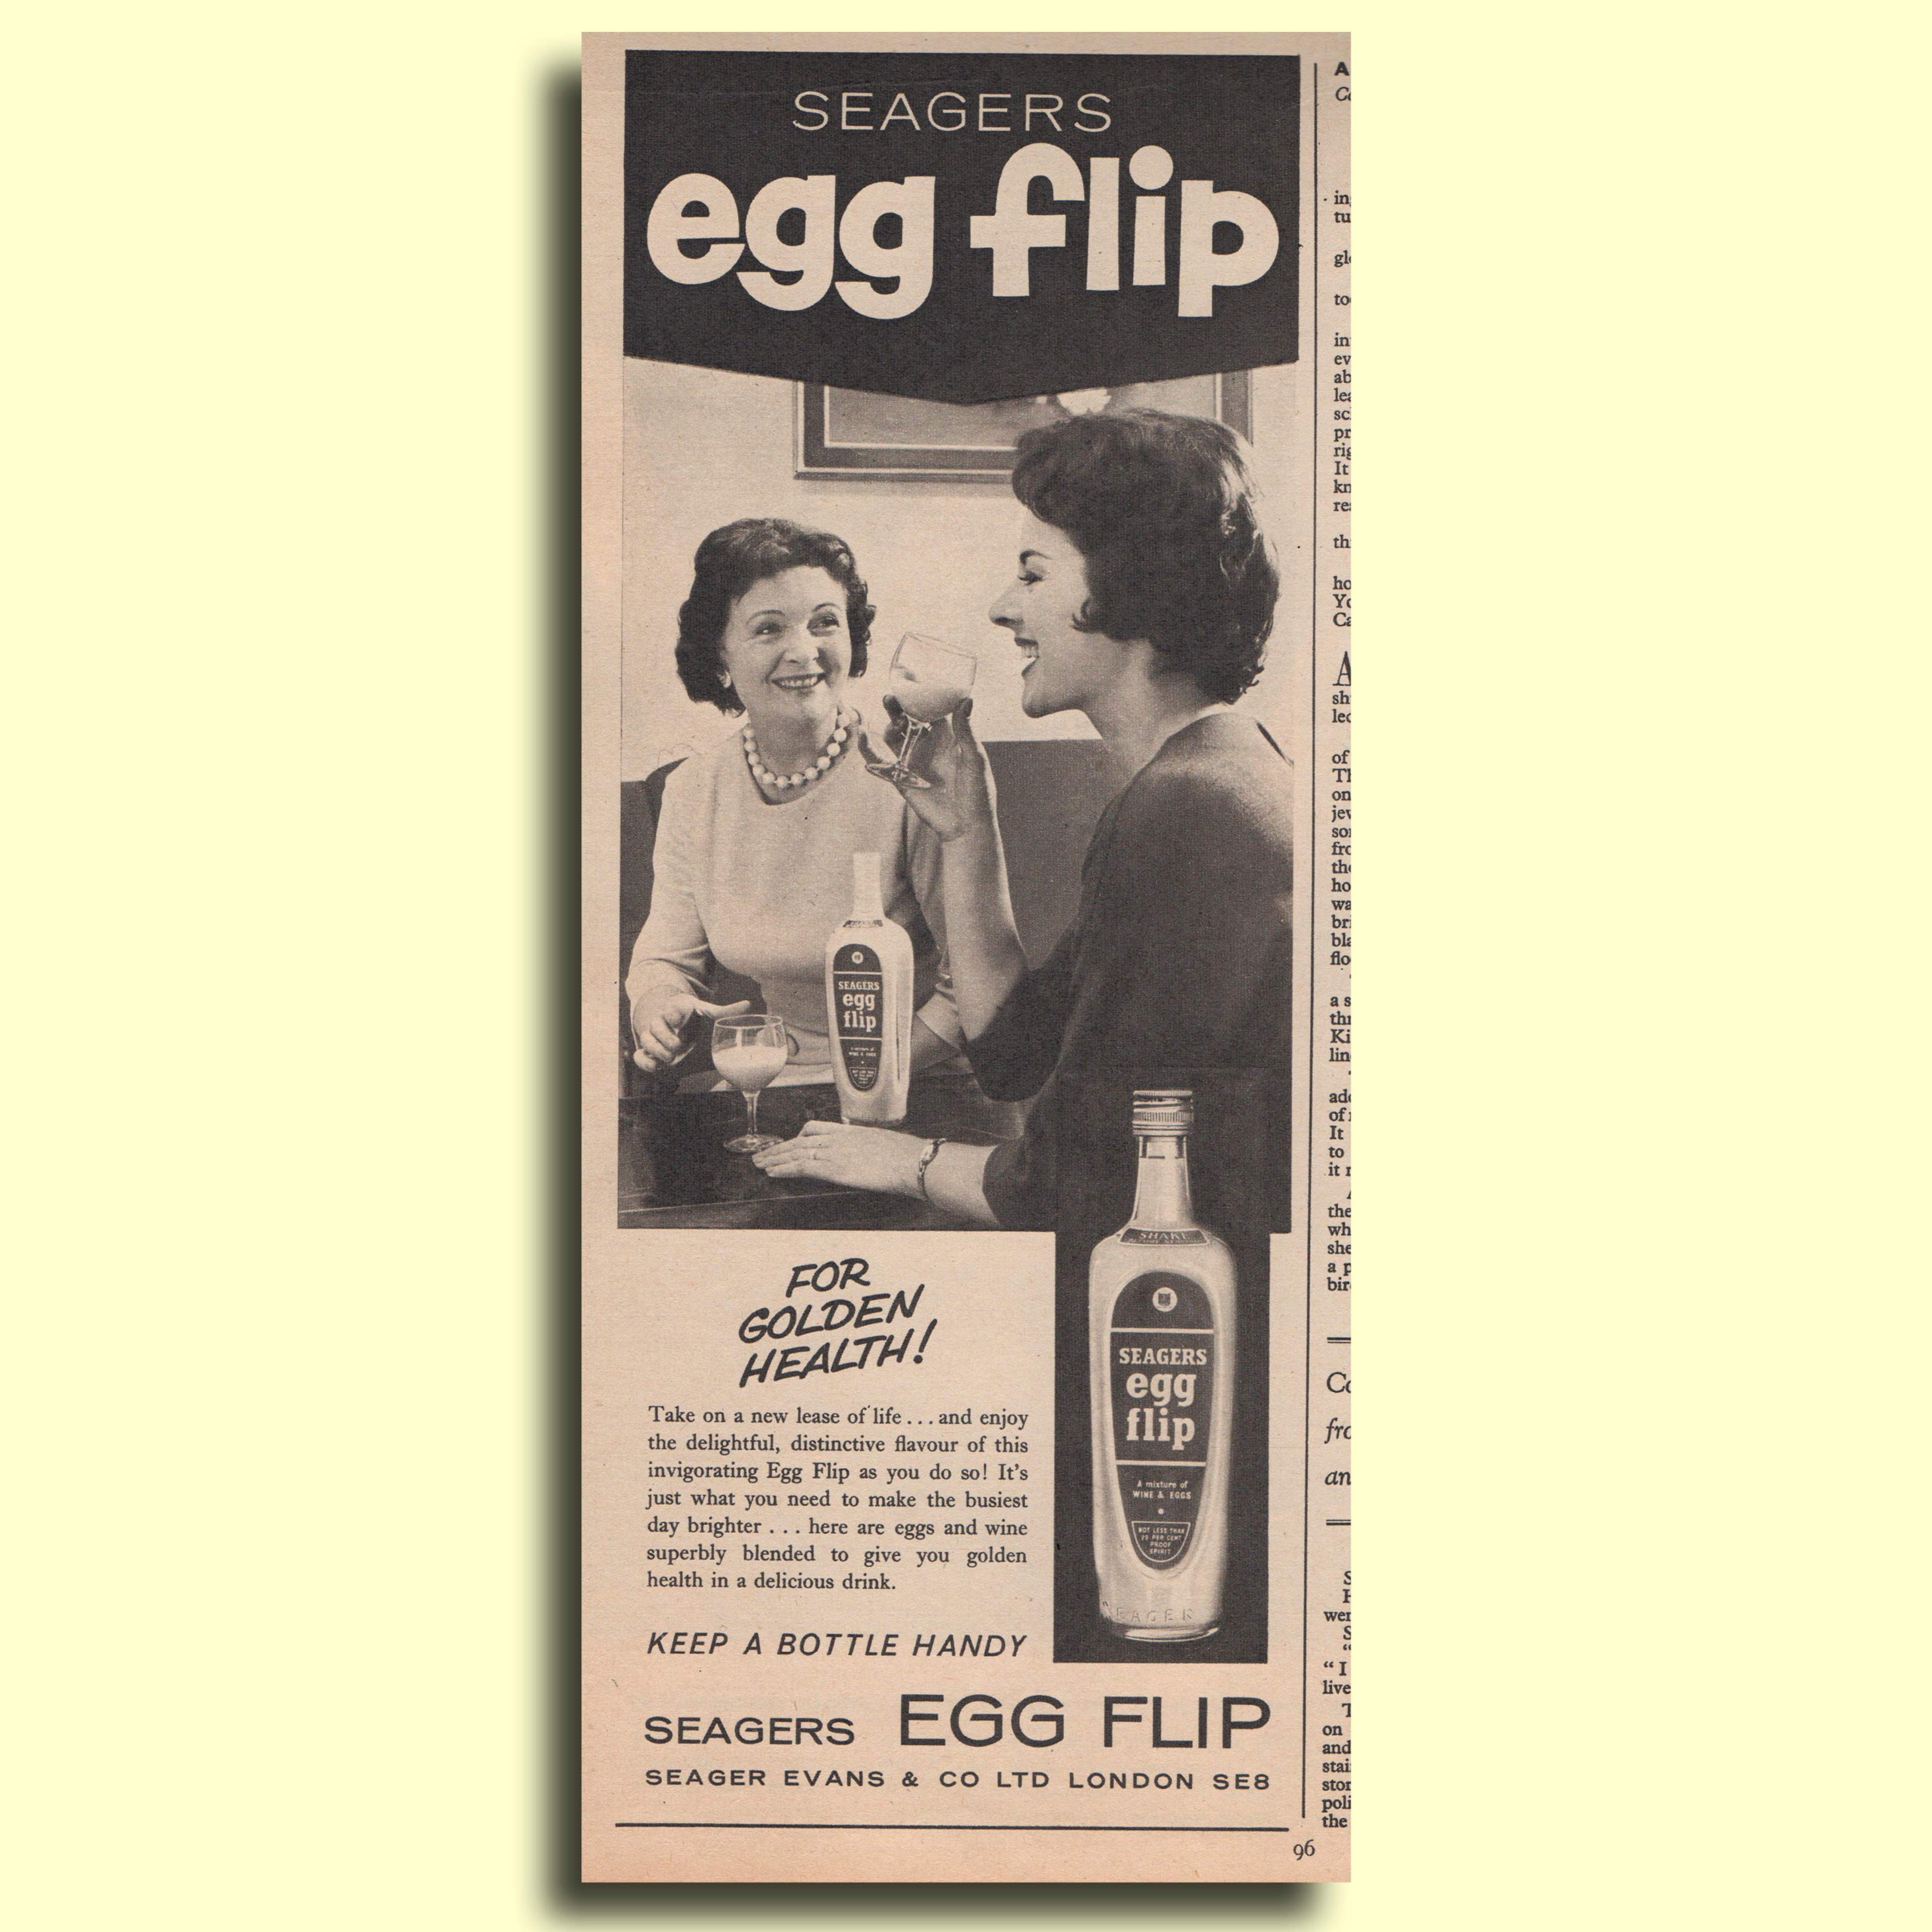 1962 Seagers Egg Flip advert. Two women are sharing a bottle of egg flip.